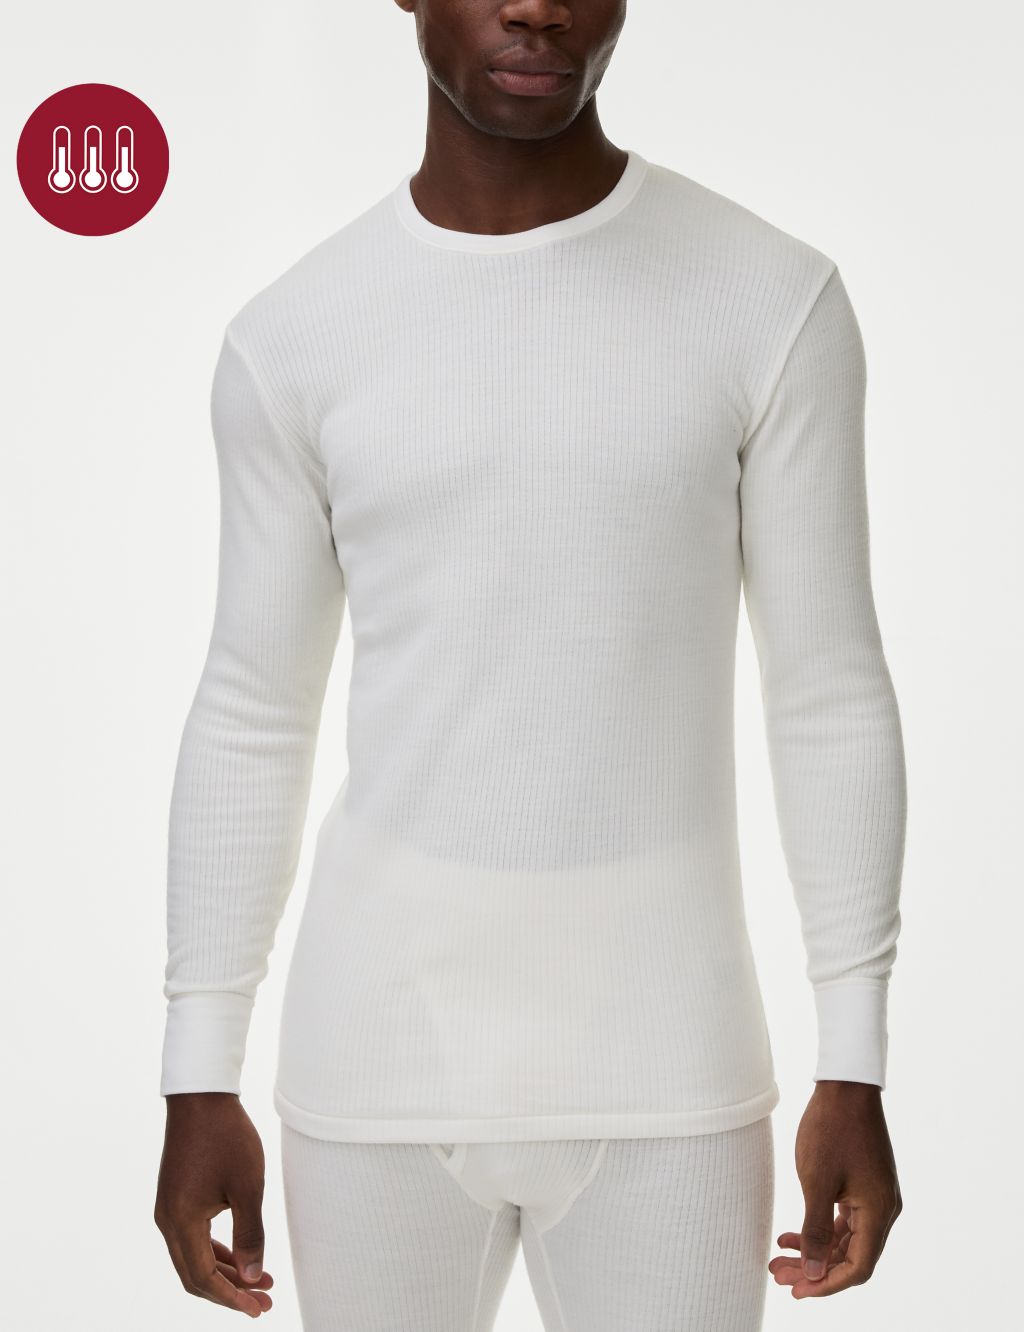 Buy White Long Sleeve Thermal T-Shirt Online in UAE from Matalan